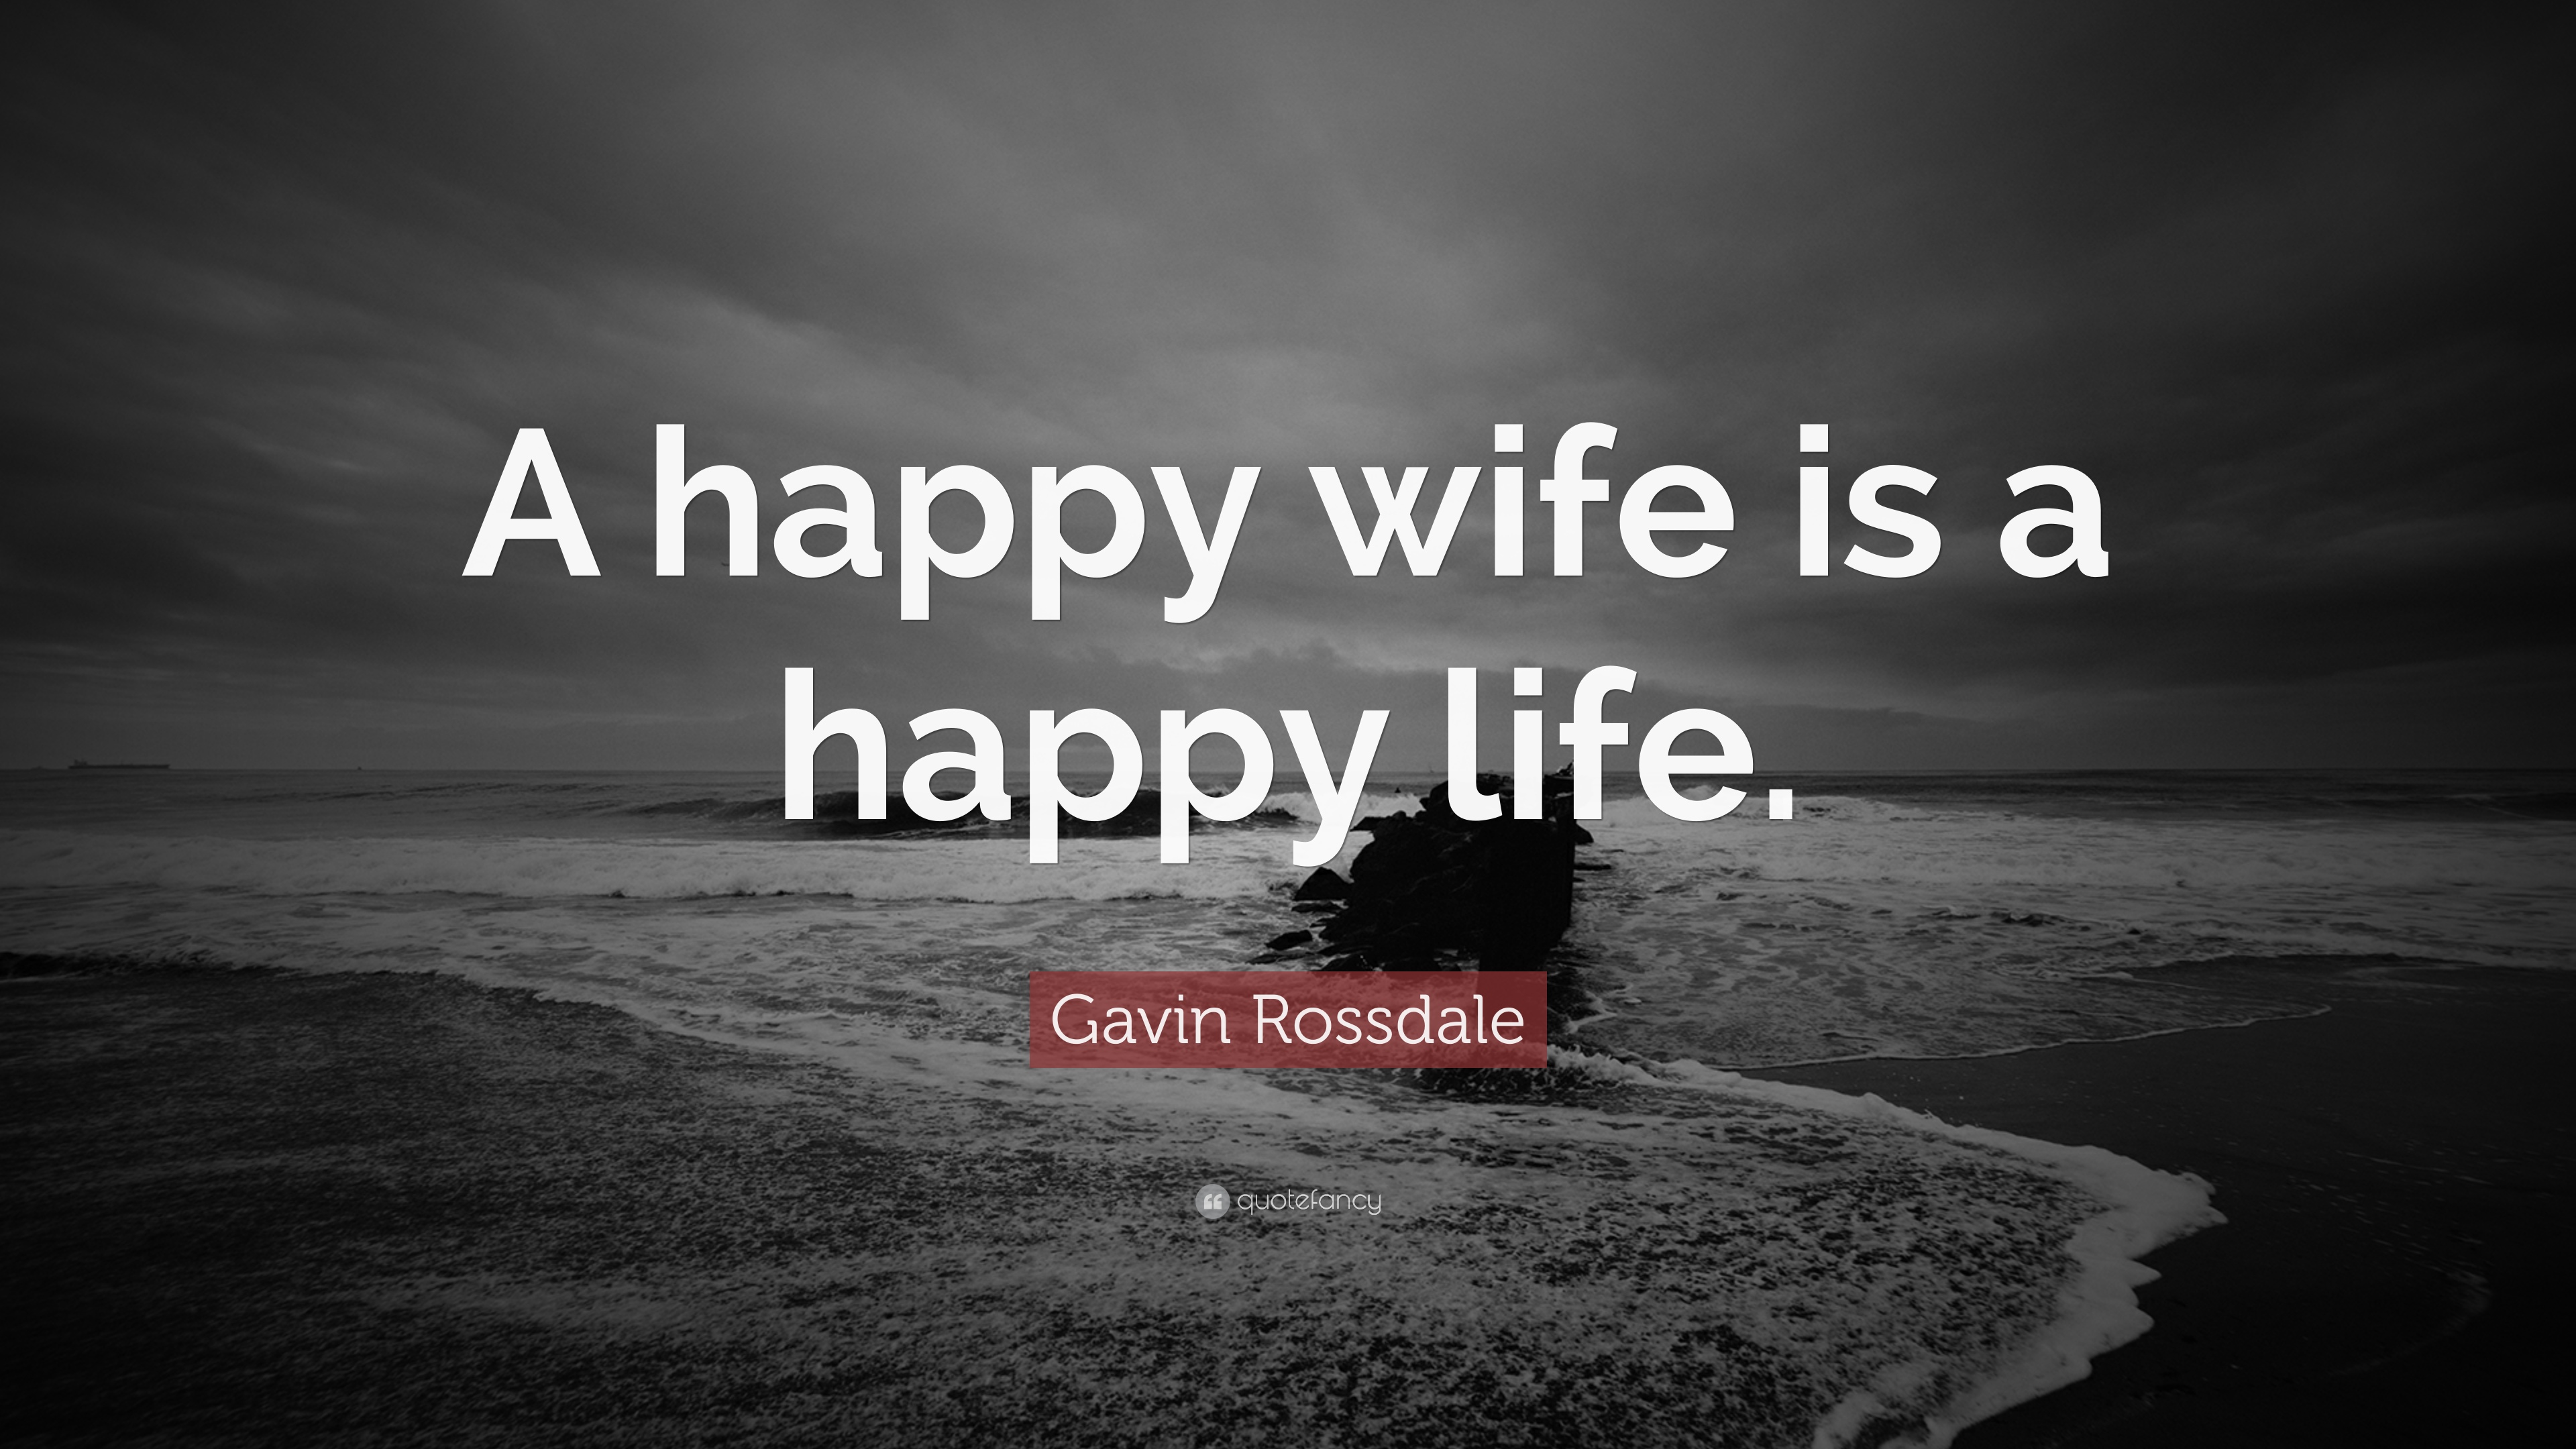 Gavin Rossdale Quote: “A happy wife is a happy life.” 12 wallpaper